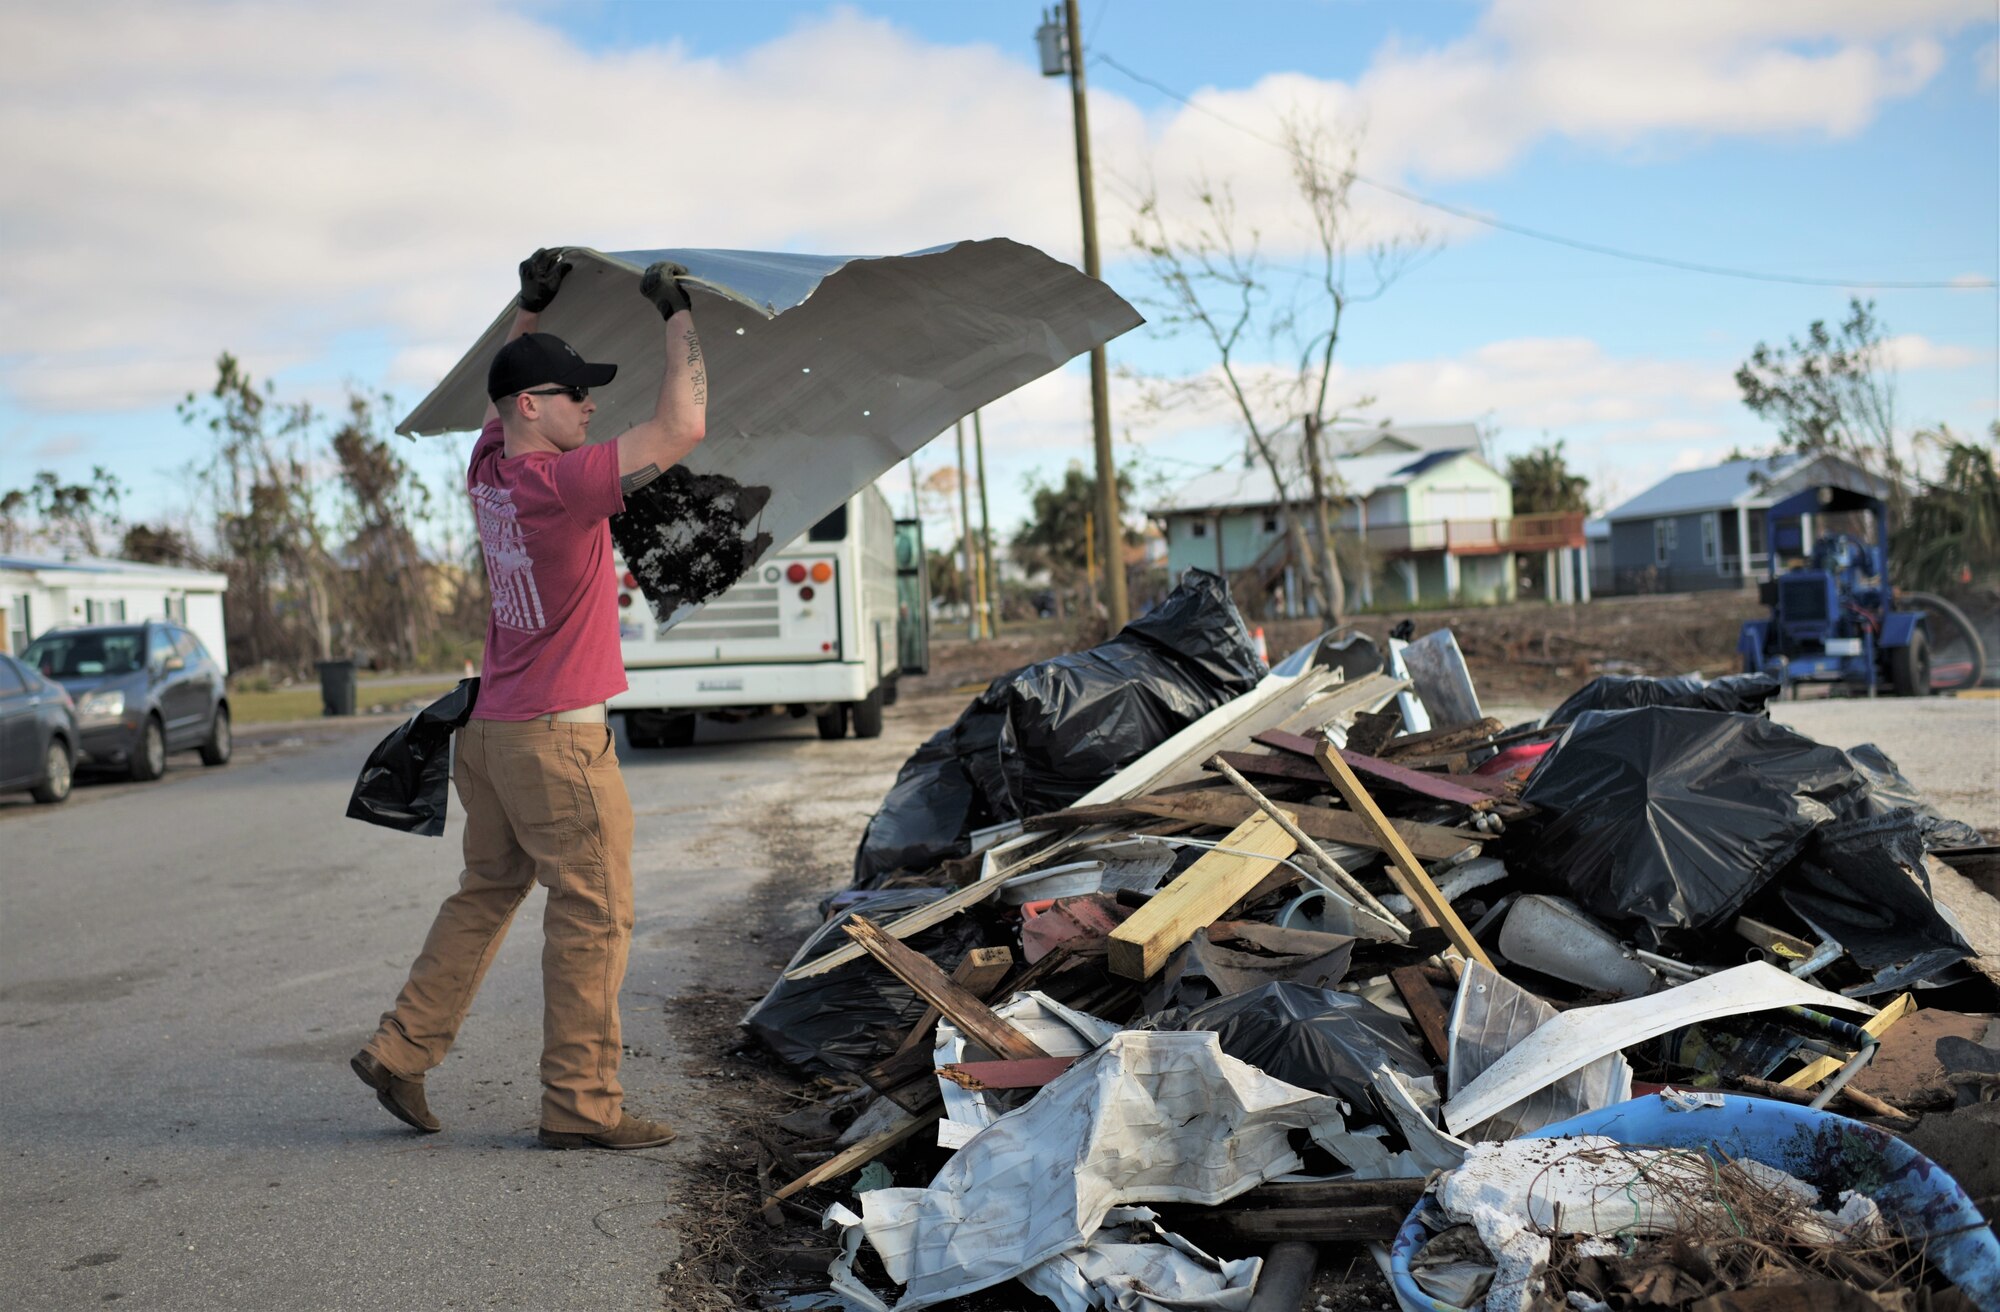 A volunteer from Tyndall Air Force Base throws paneling from a house into a pile of debris while cleaning Under the Palms Park in Mexico Beach, Fla., Dec. 16, 2018. Thirty nine volunteers from Tyndall and Eglin Air Force Bases came together to help clean of Mexico Beach, one of the communities hit the hardest by Hurricane Michael.  The volunteers were able to clean up more than 40 cubic yards of debris within four hours. (U.S. Air Force photo by Tech. Sgt. Sara Keller)